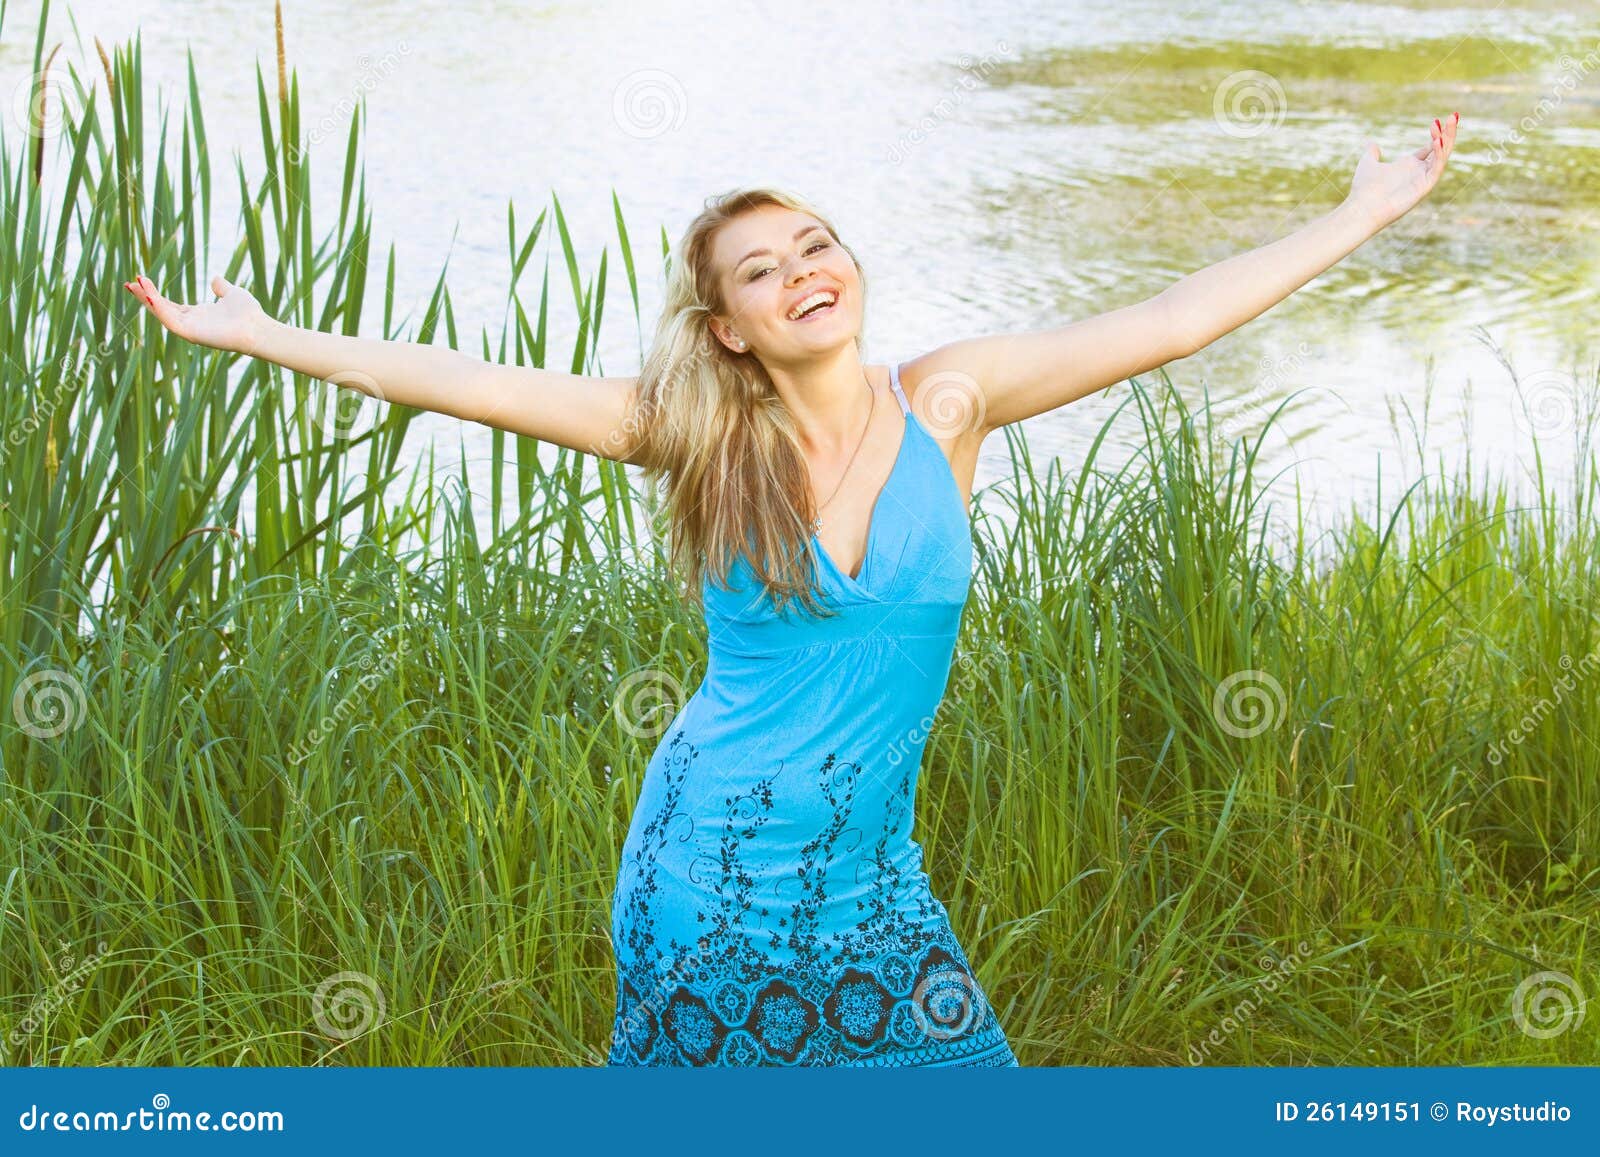 https://thumbs.dreamstime.com/z/happy-smile-woman-natural-background-26149151.jpg